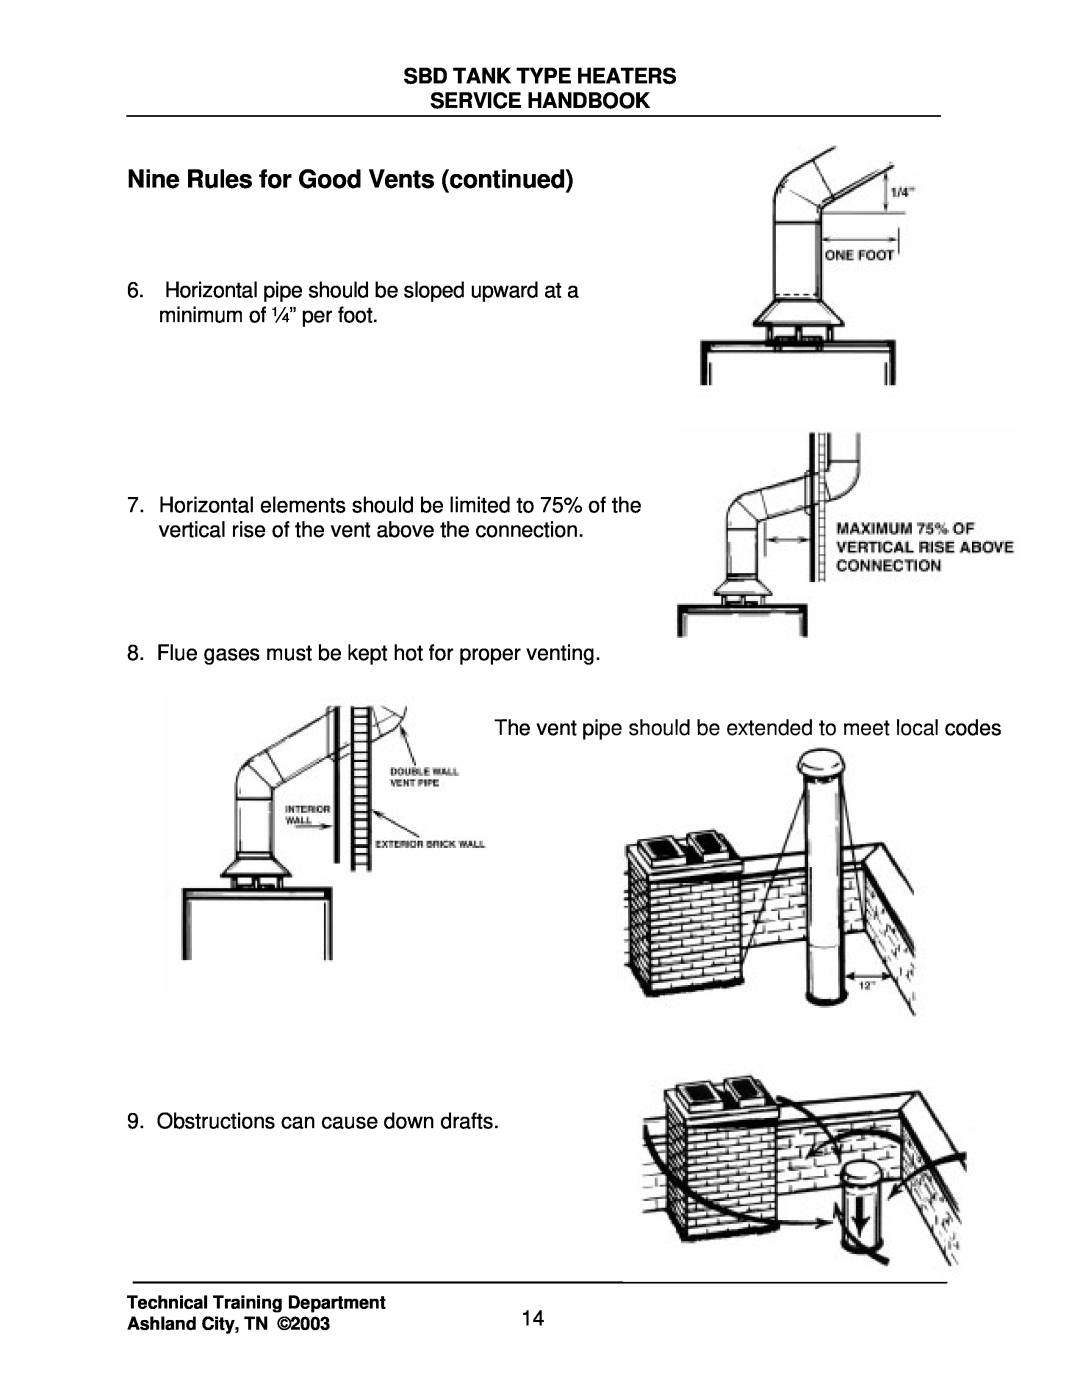 State Industries SBD71 120, SBD85 500 manual Nine Rules for Good Vents continued, Sbd Tank Type Heaters Service Handbook 